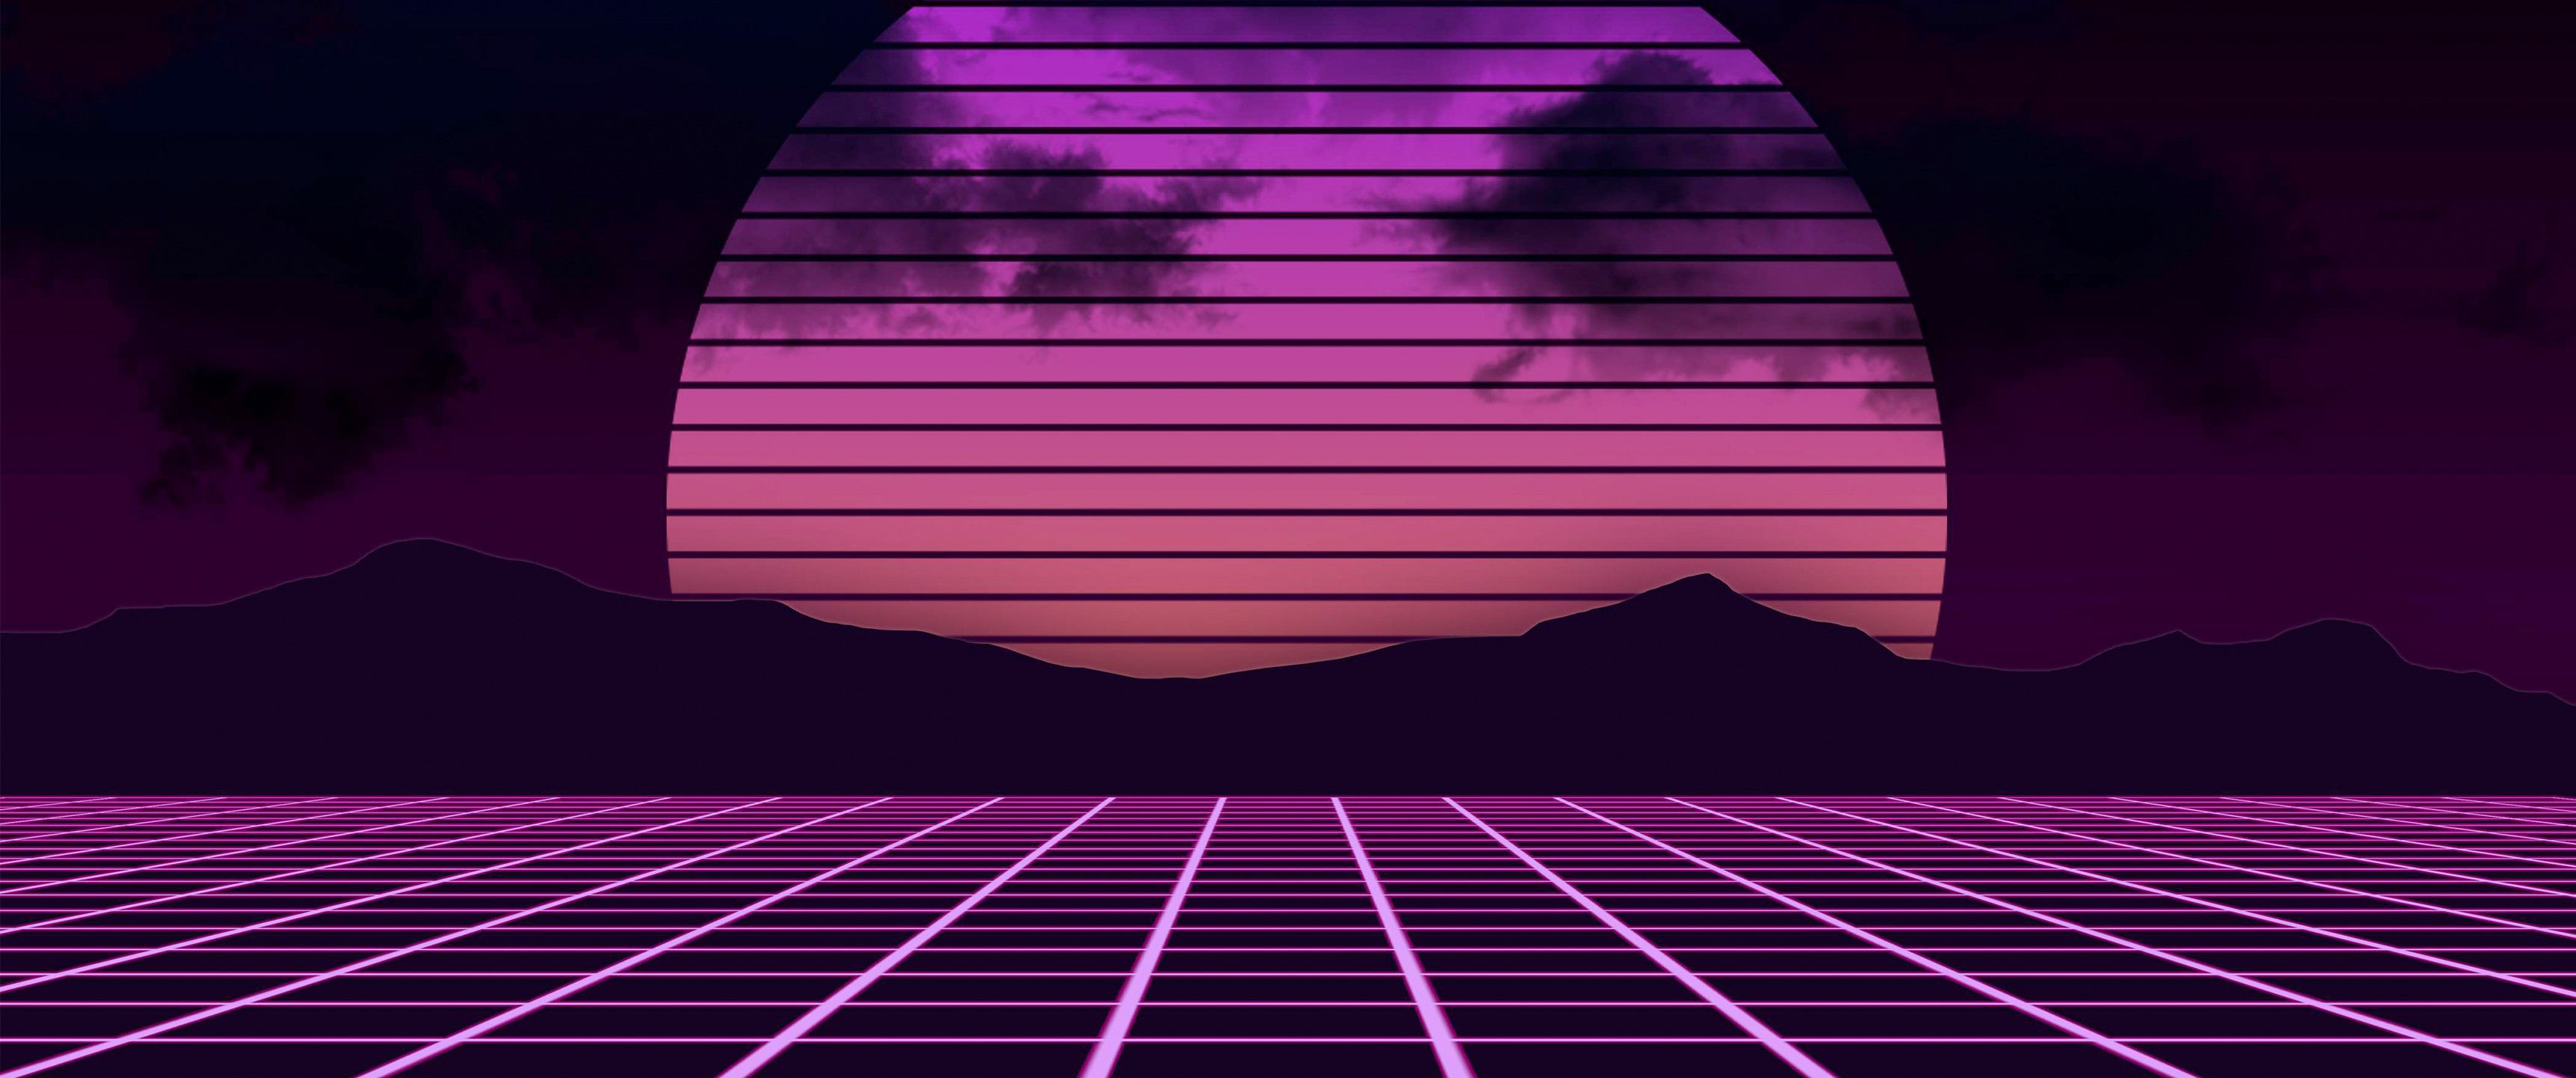 Retro Aesthetic Wallpapers HD Free download 